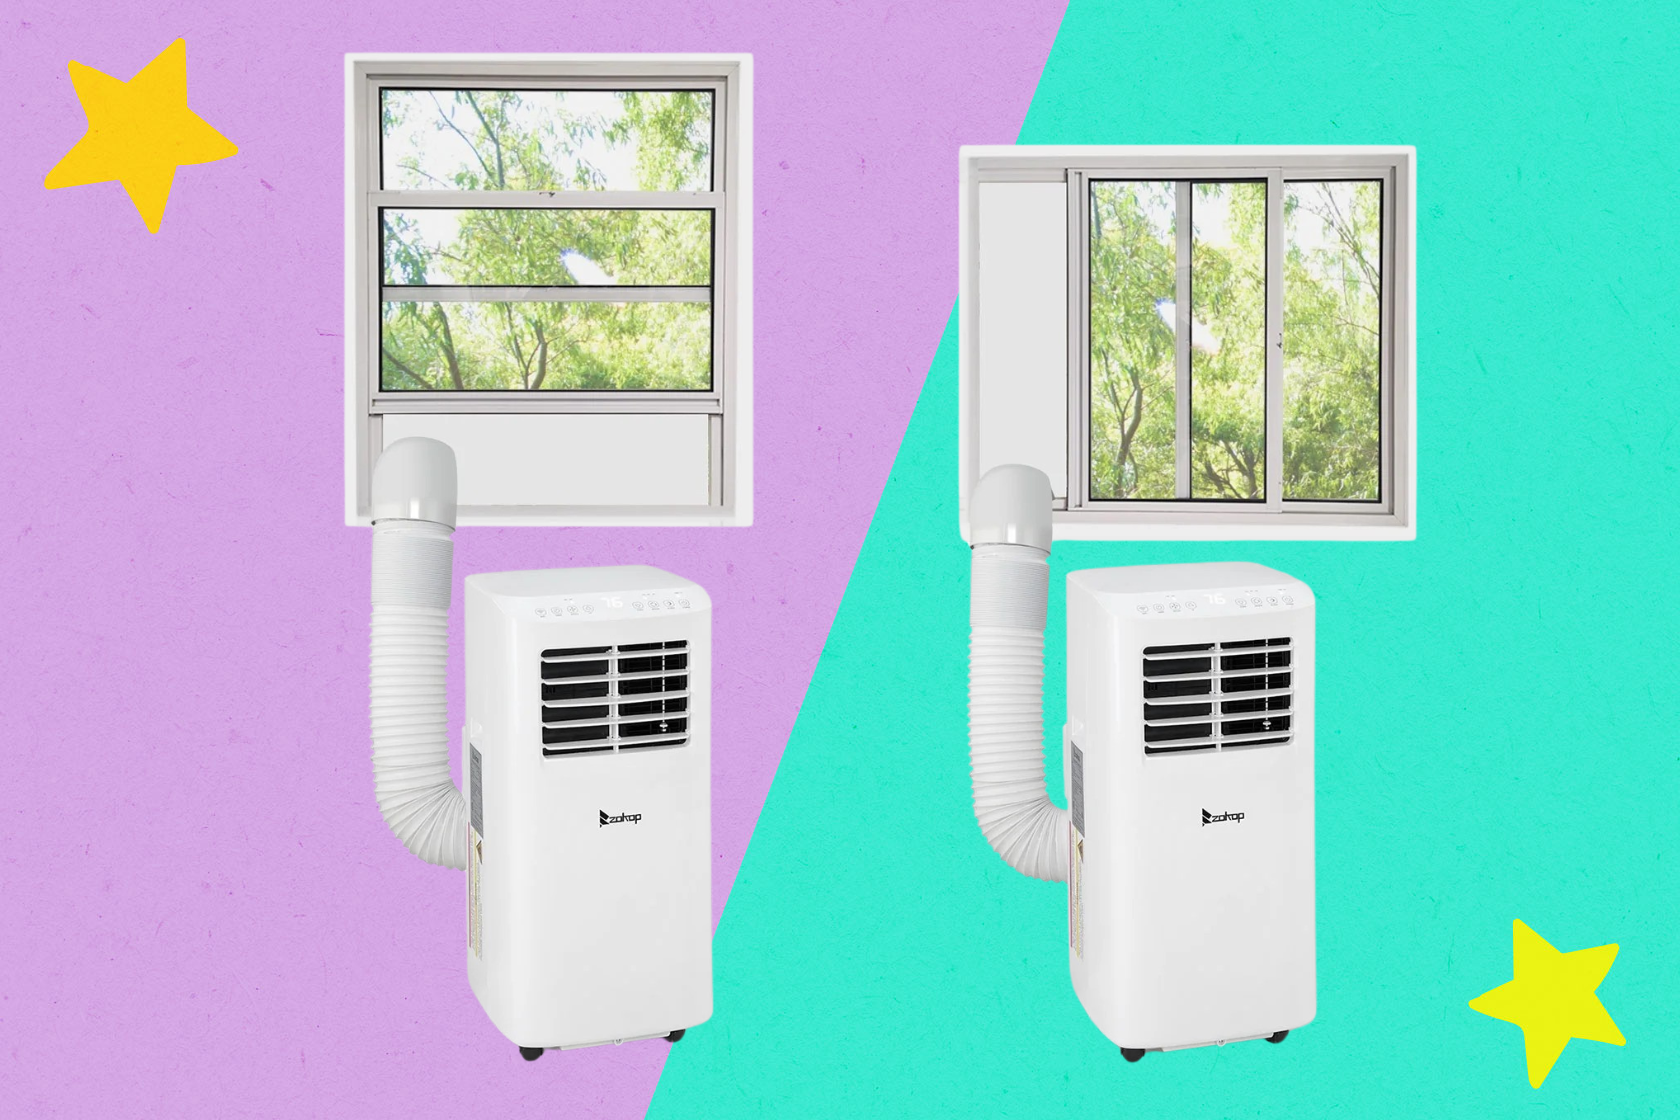 Save over $115 on this portable air conditioner just in time for warmer weather